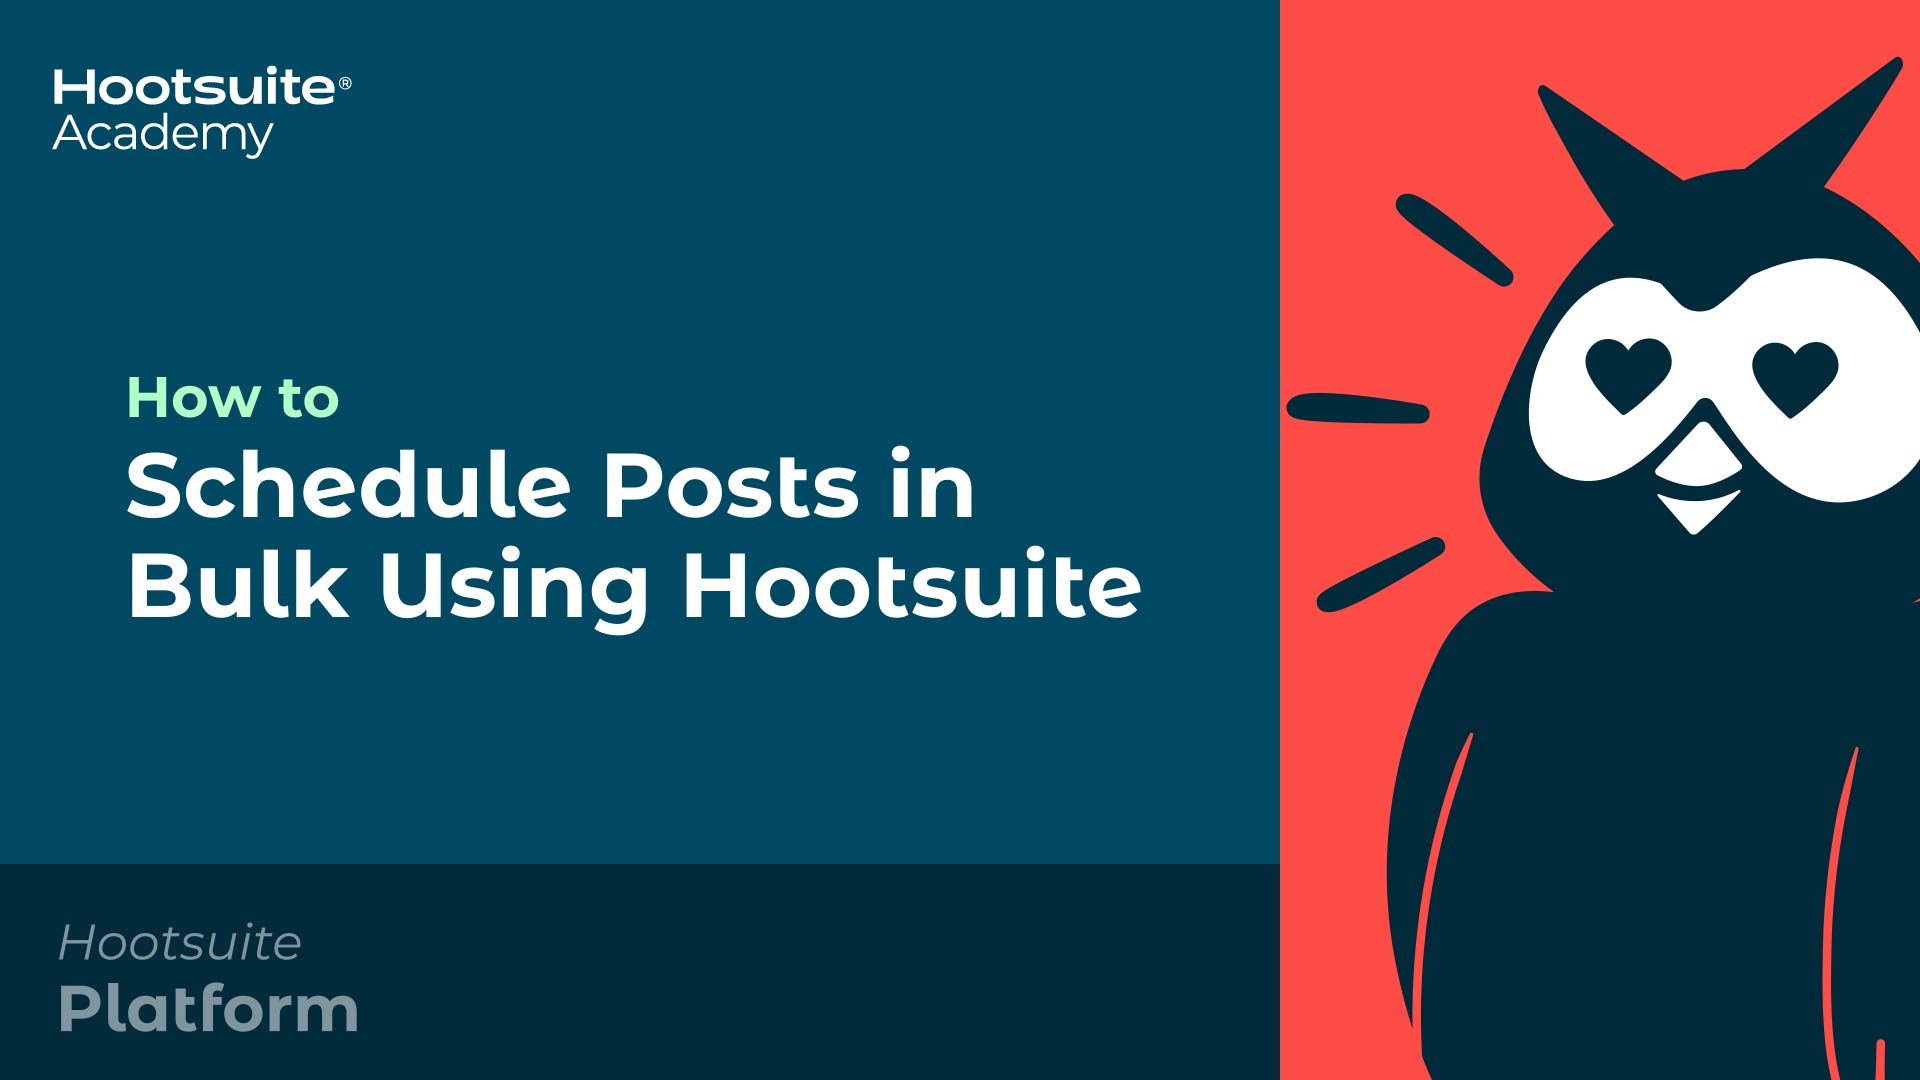 Video: How to schedule posts in bulk using Hootsuite.